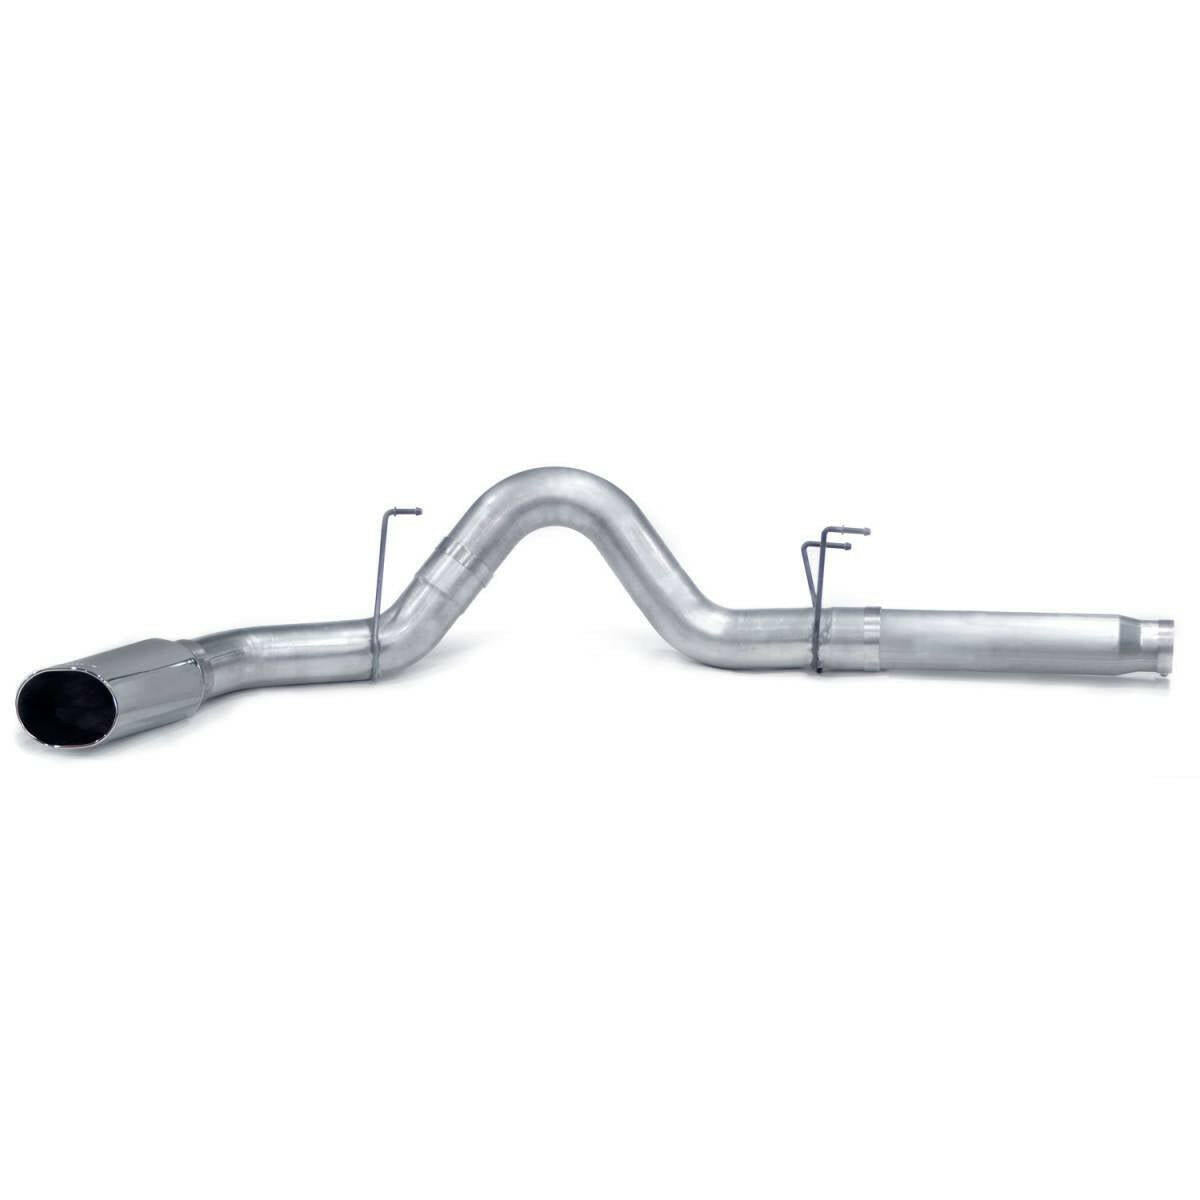 Banks Power Monster Exhaust System 5-inch Single S/S-Chrome Tip for 10-12 Ram 2500/3500 Cummins 6.7L CCSB CCLB MCSB Banks Power